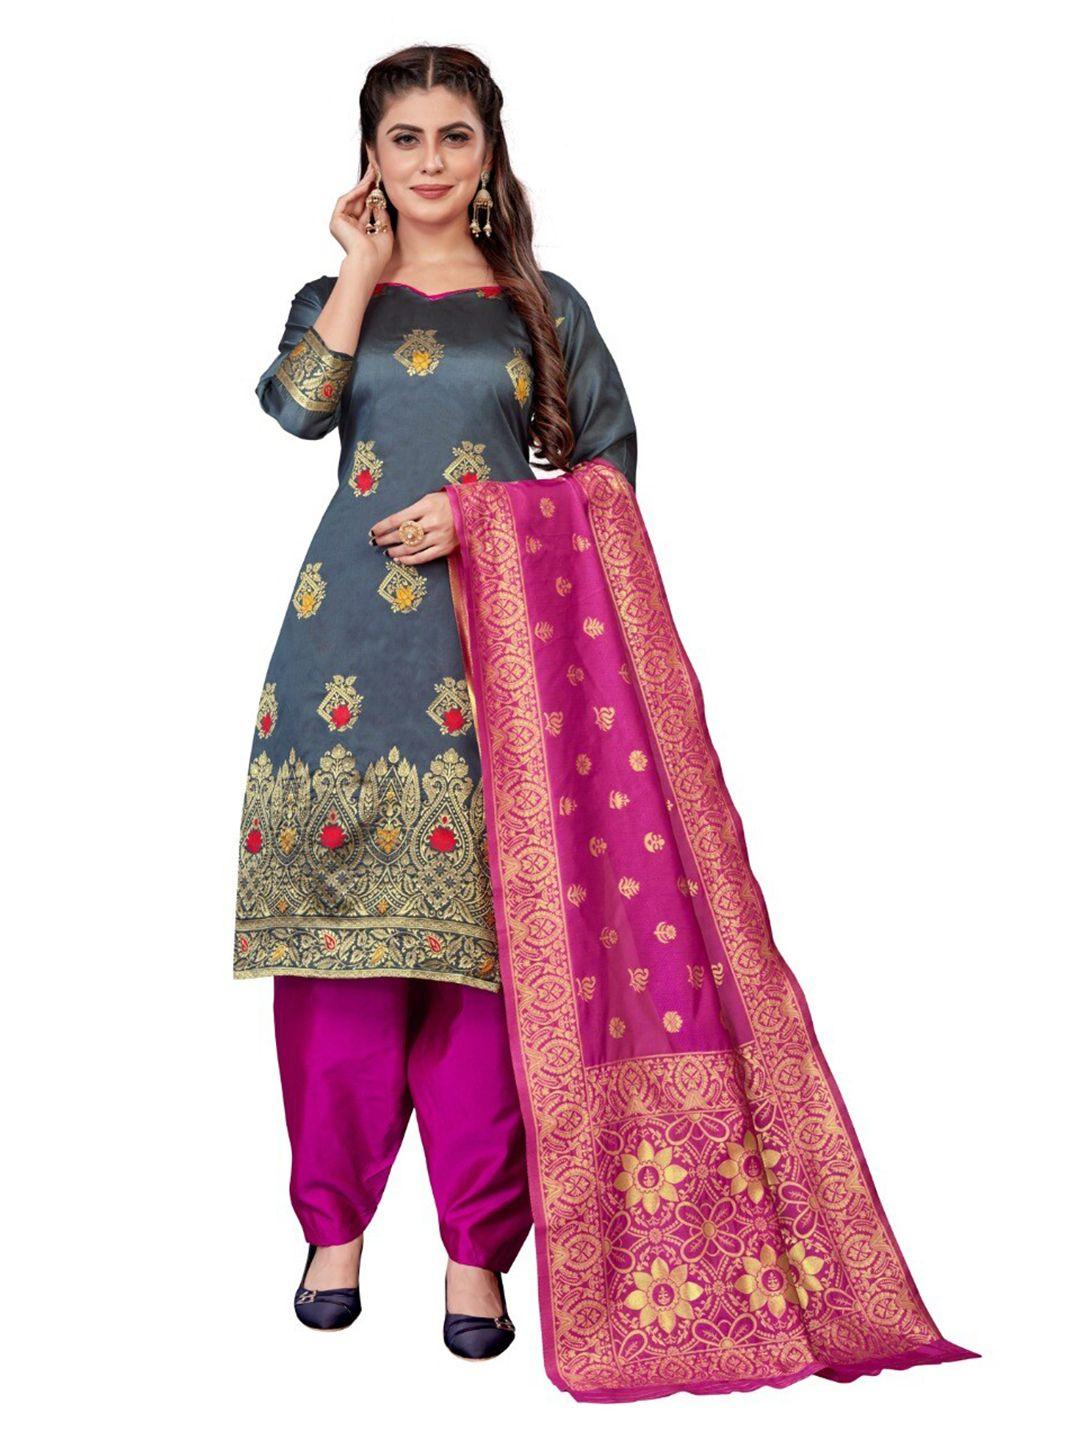 morly-women-grey-&-pink-dupion-silk-unstitched-dress-material